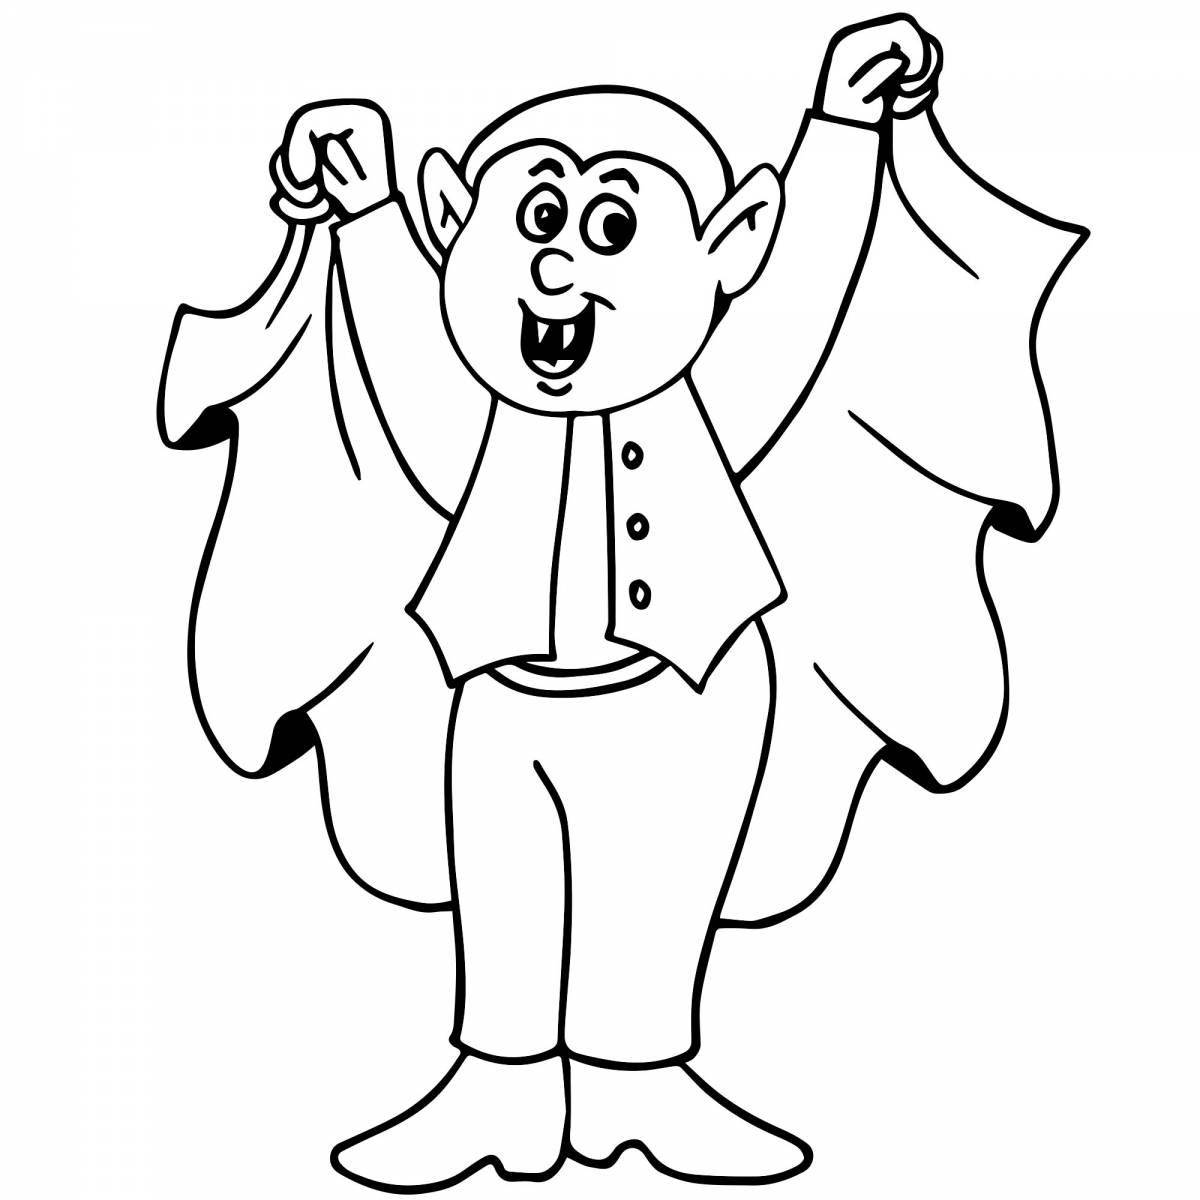 Vampire coloring page for kids